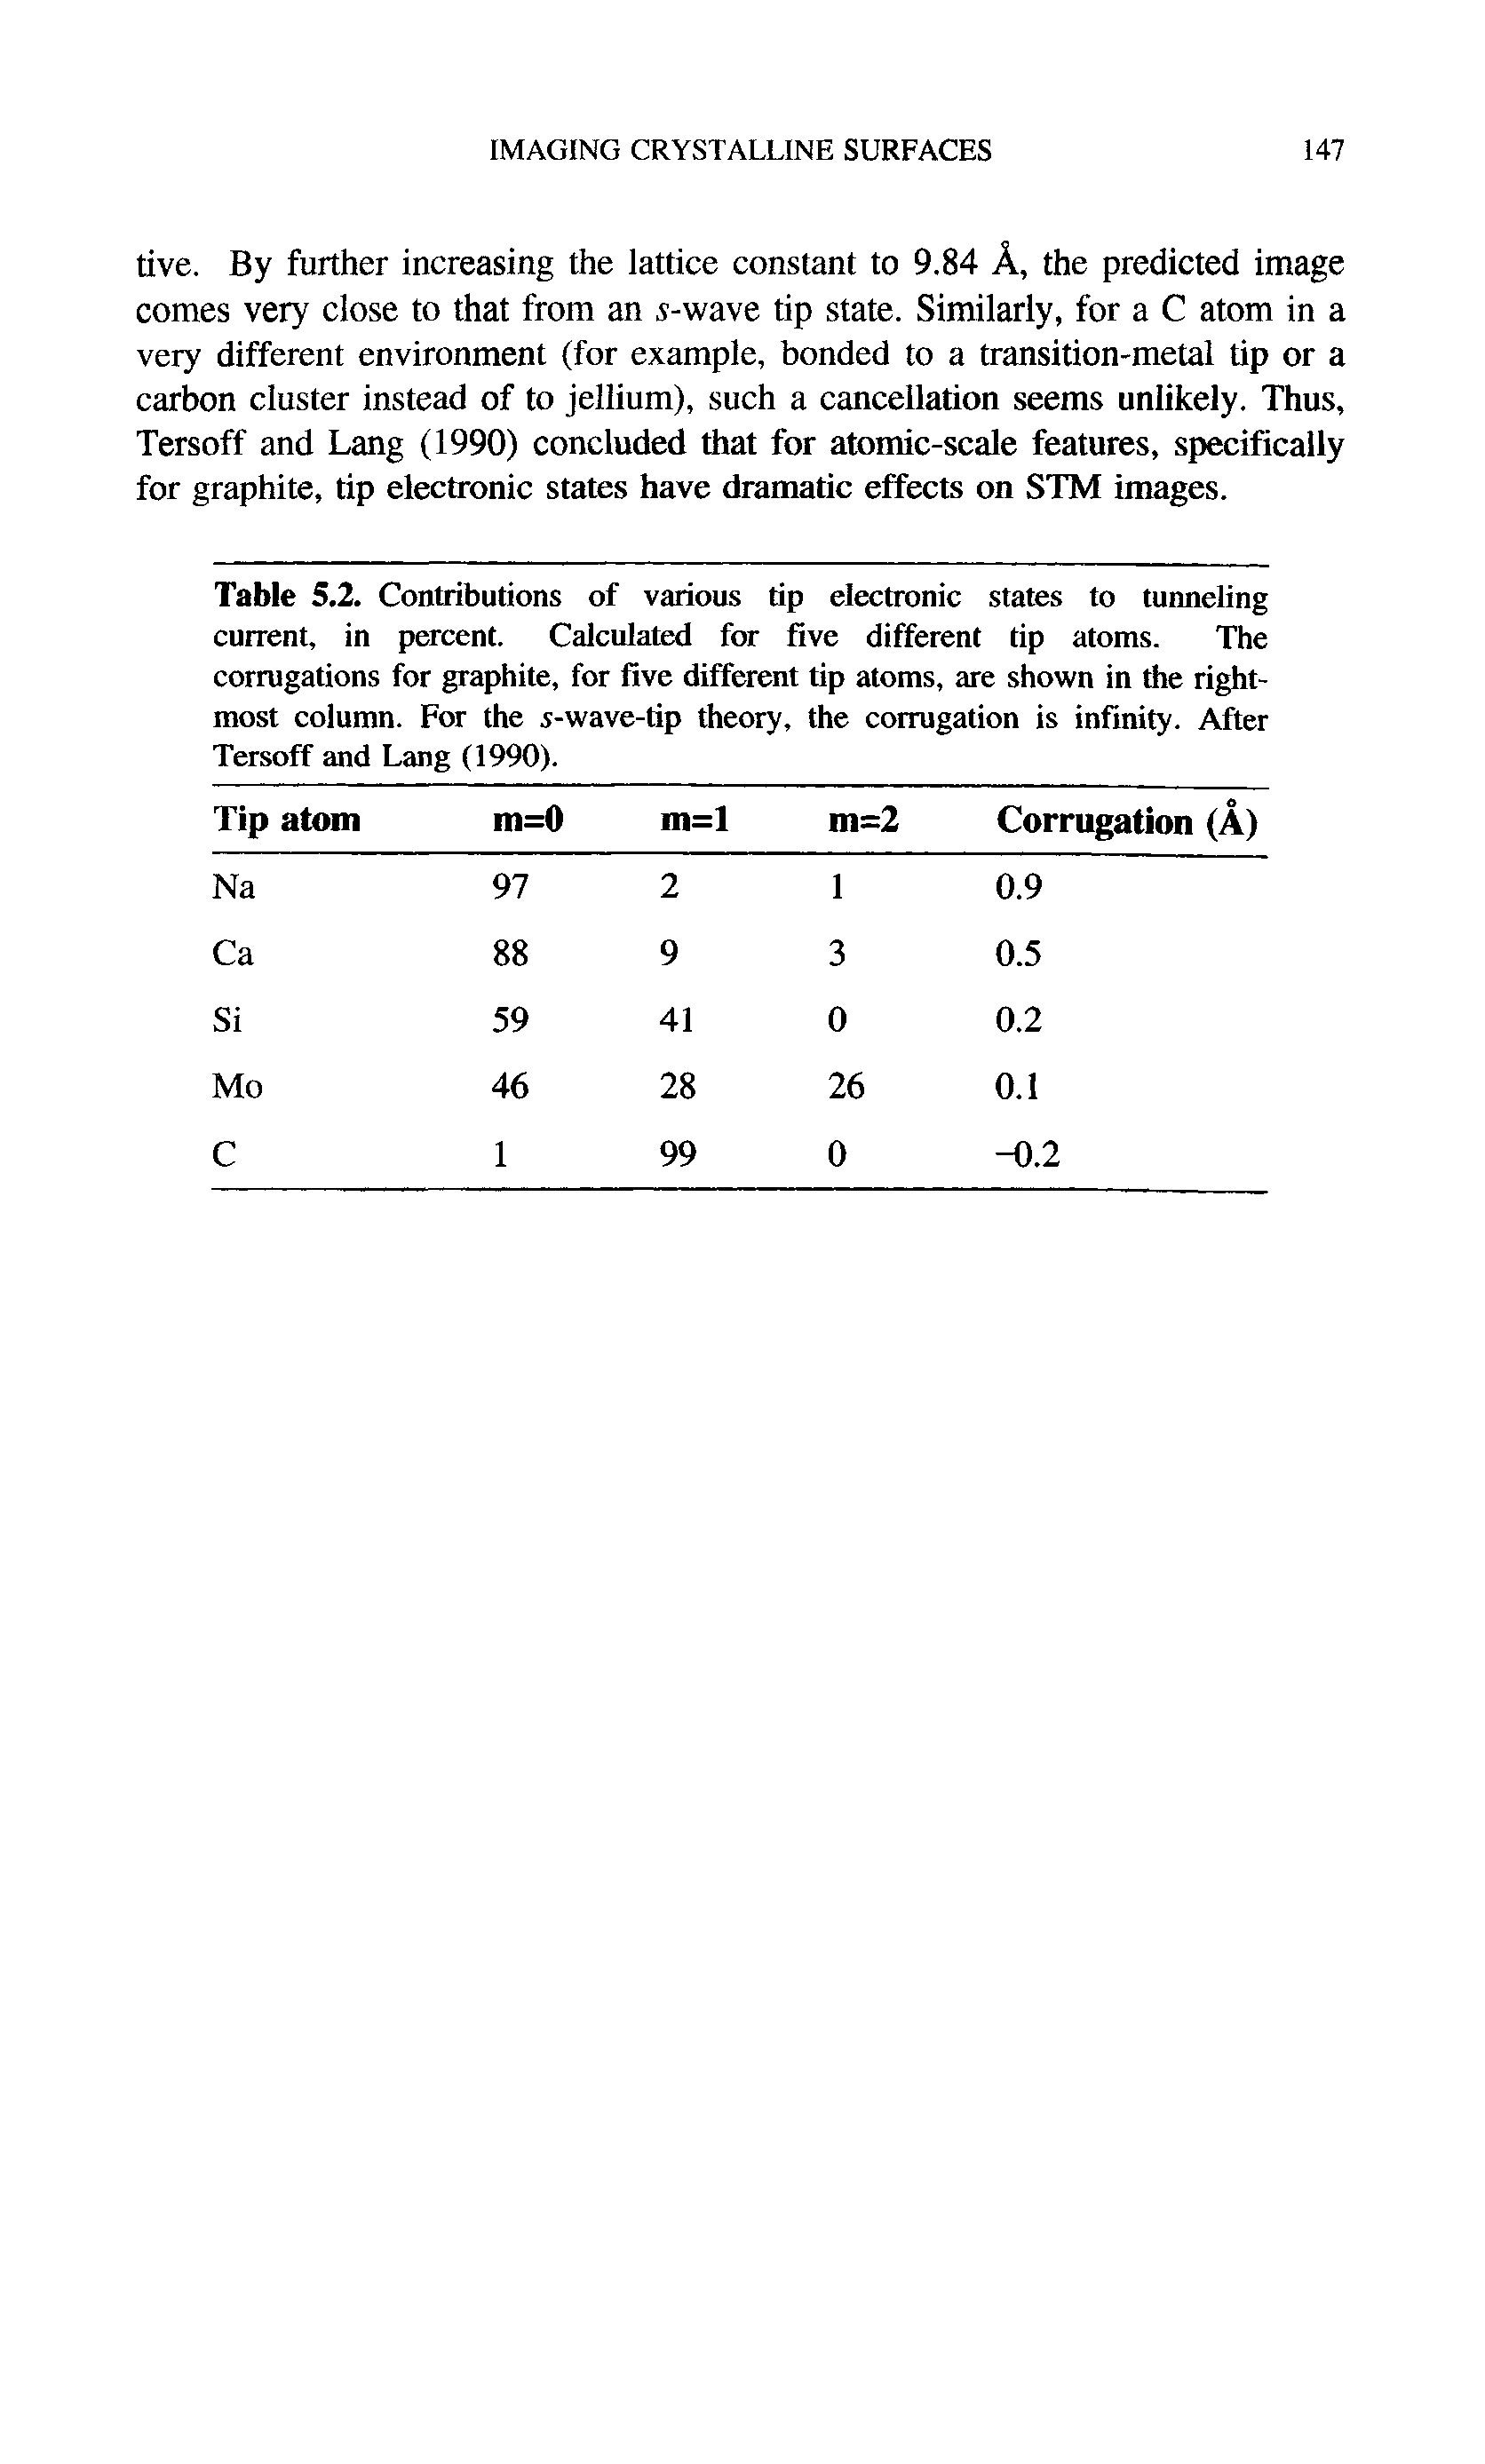 Table 5.2. Contributions of various tip electronic states to tunneling current, in percent. Calculated for five different tip atoms. The corrugations for graphite, for five different tip atoms, are shown in the rightmost column. For the s-wave-tip theory, the corrugation is infinity. After Tersoff and Lang (1990).